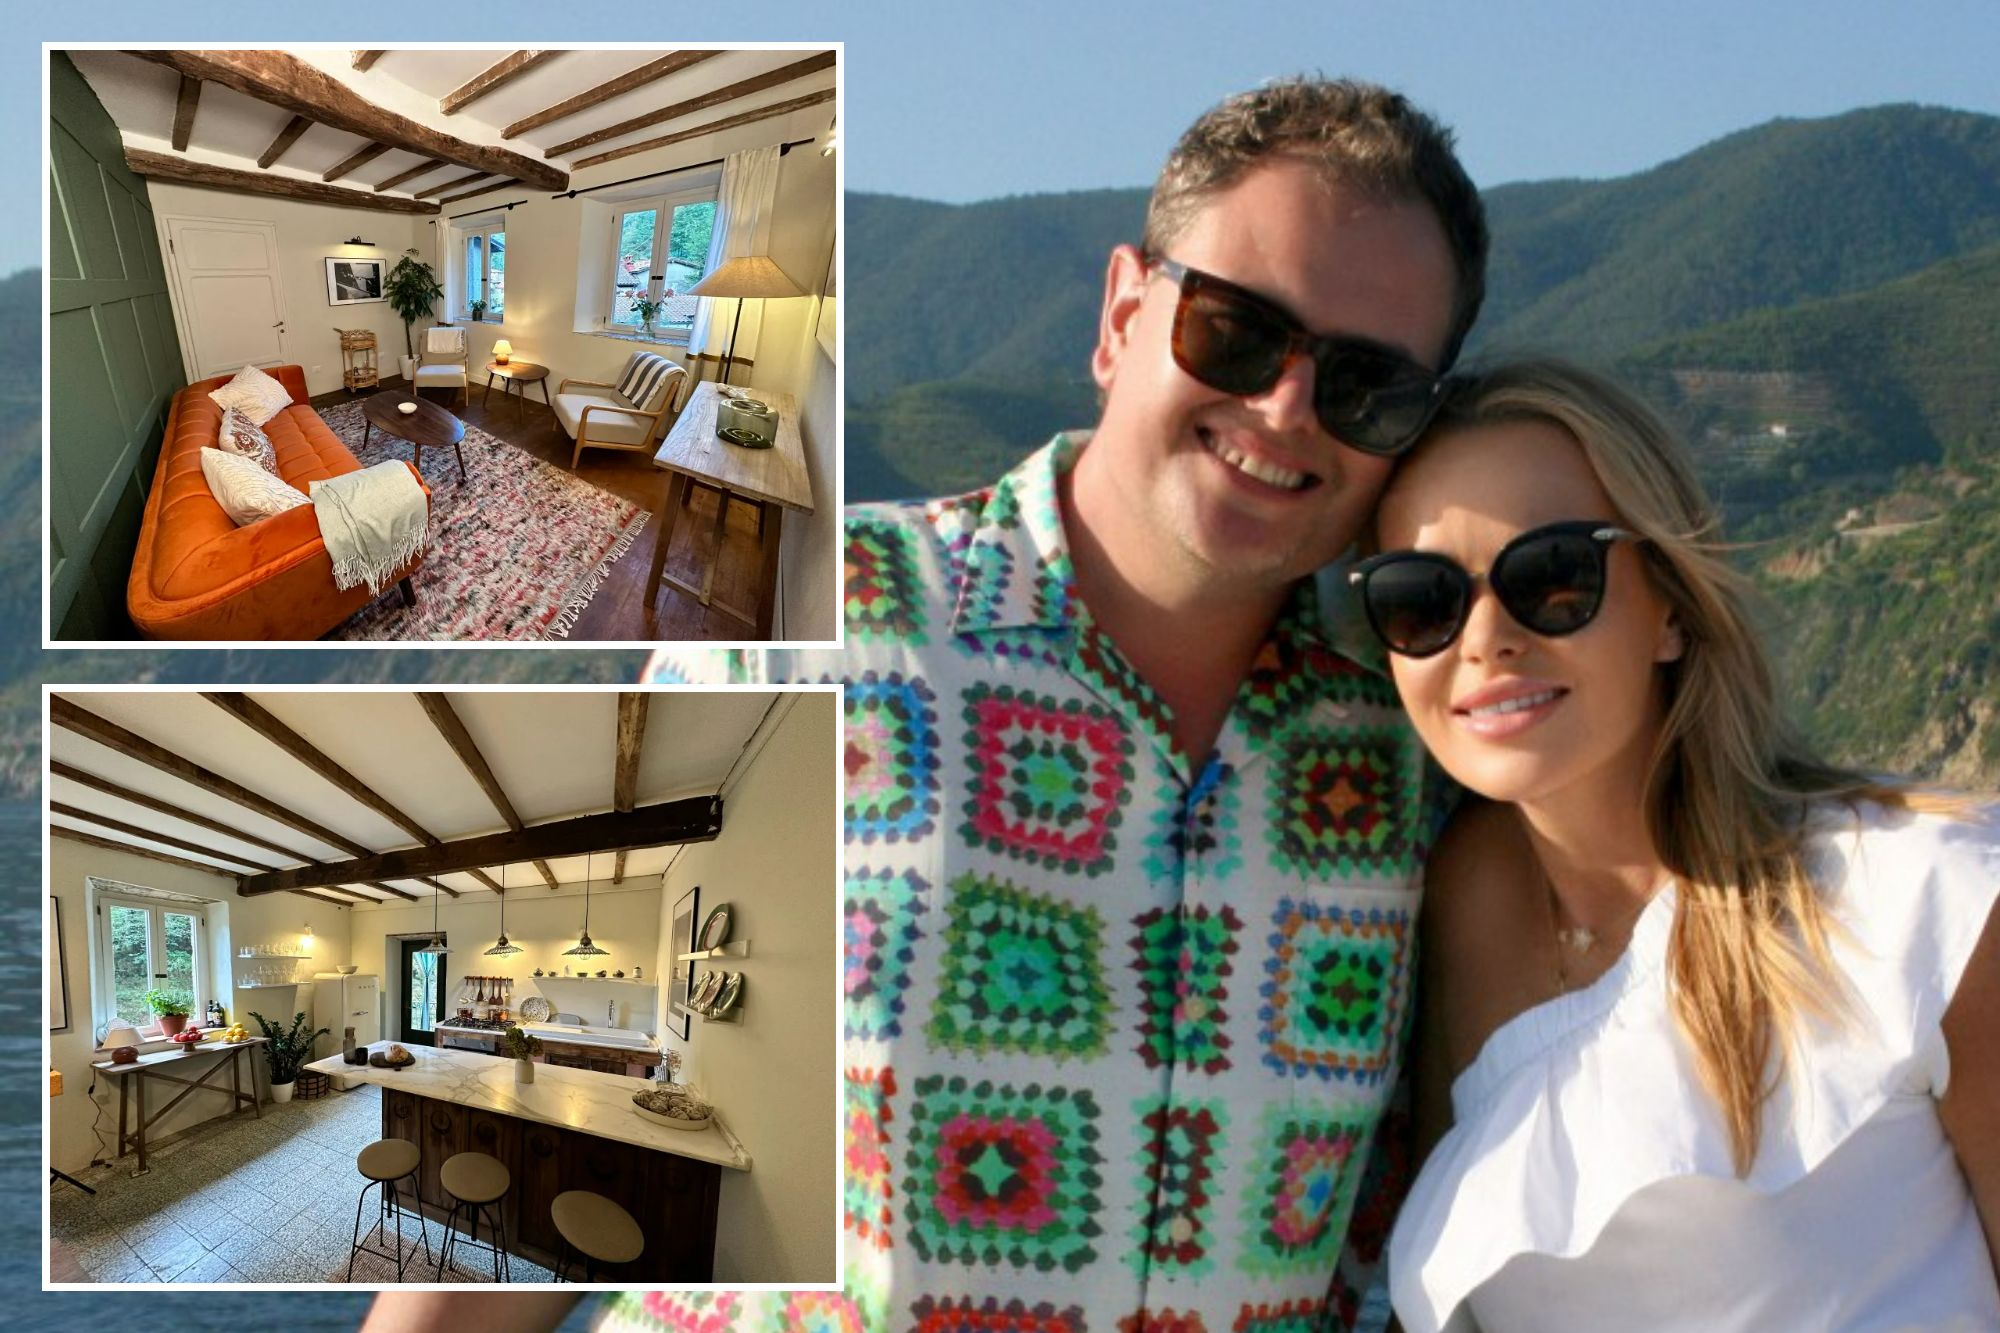 Amanda Holden and Alan Carr sell home they renovated on show for eye-watering sum